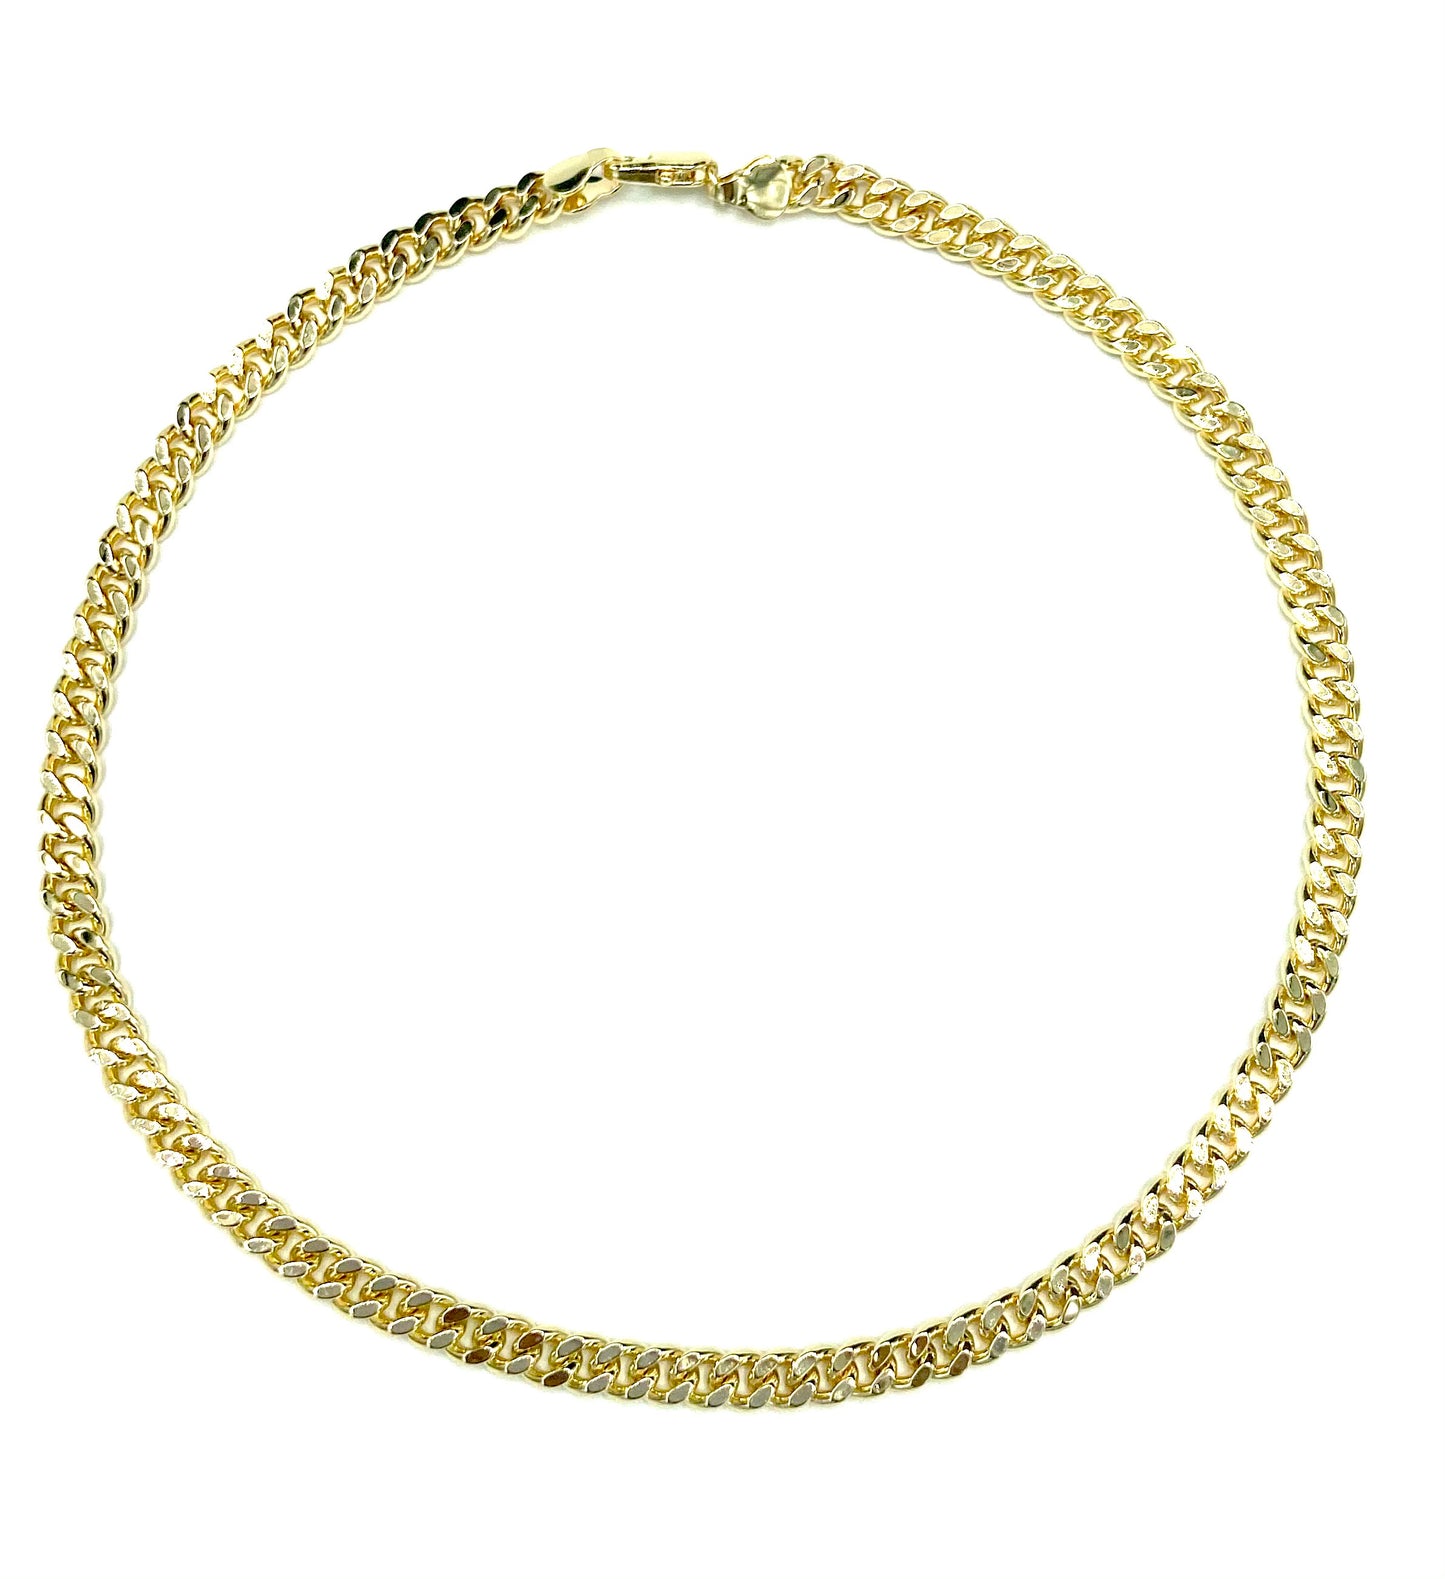 THIN CUBAN LINK NECKLACE